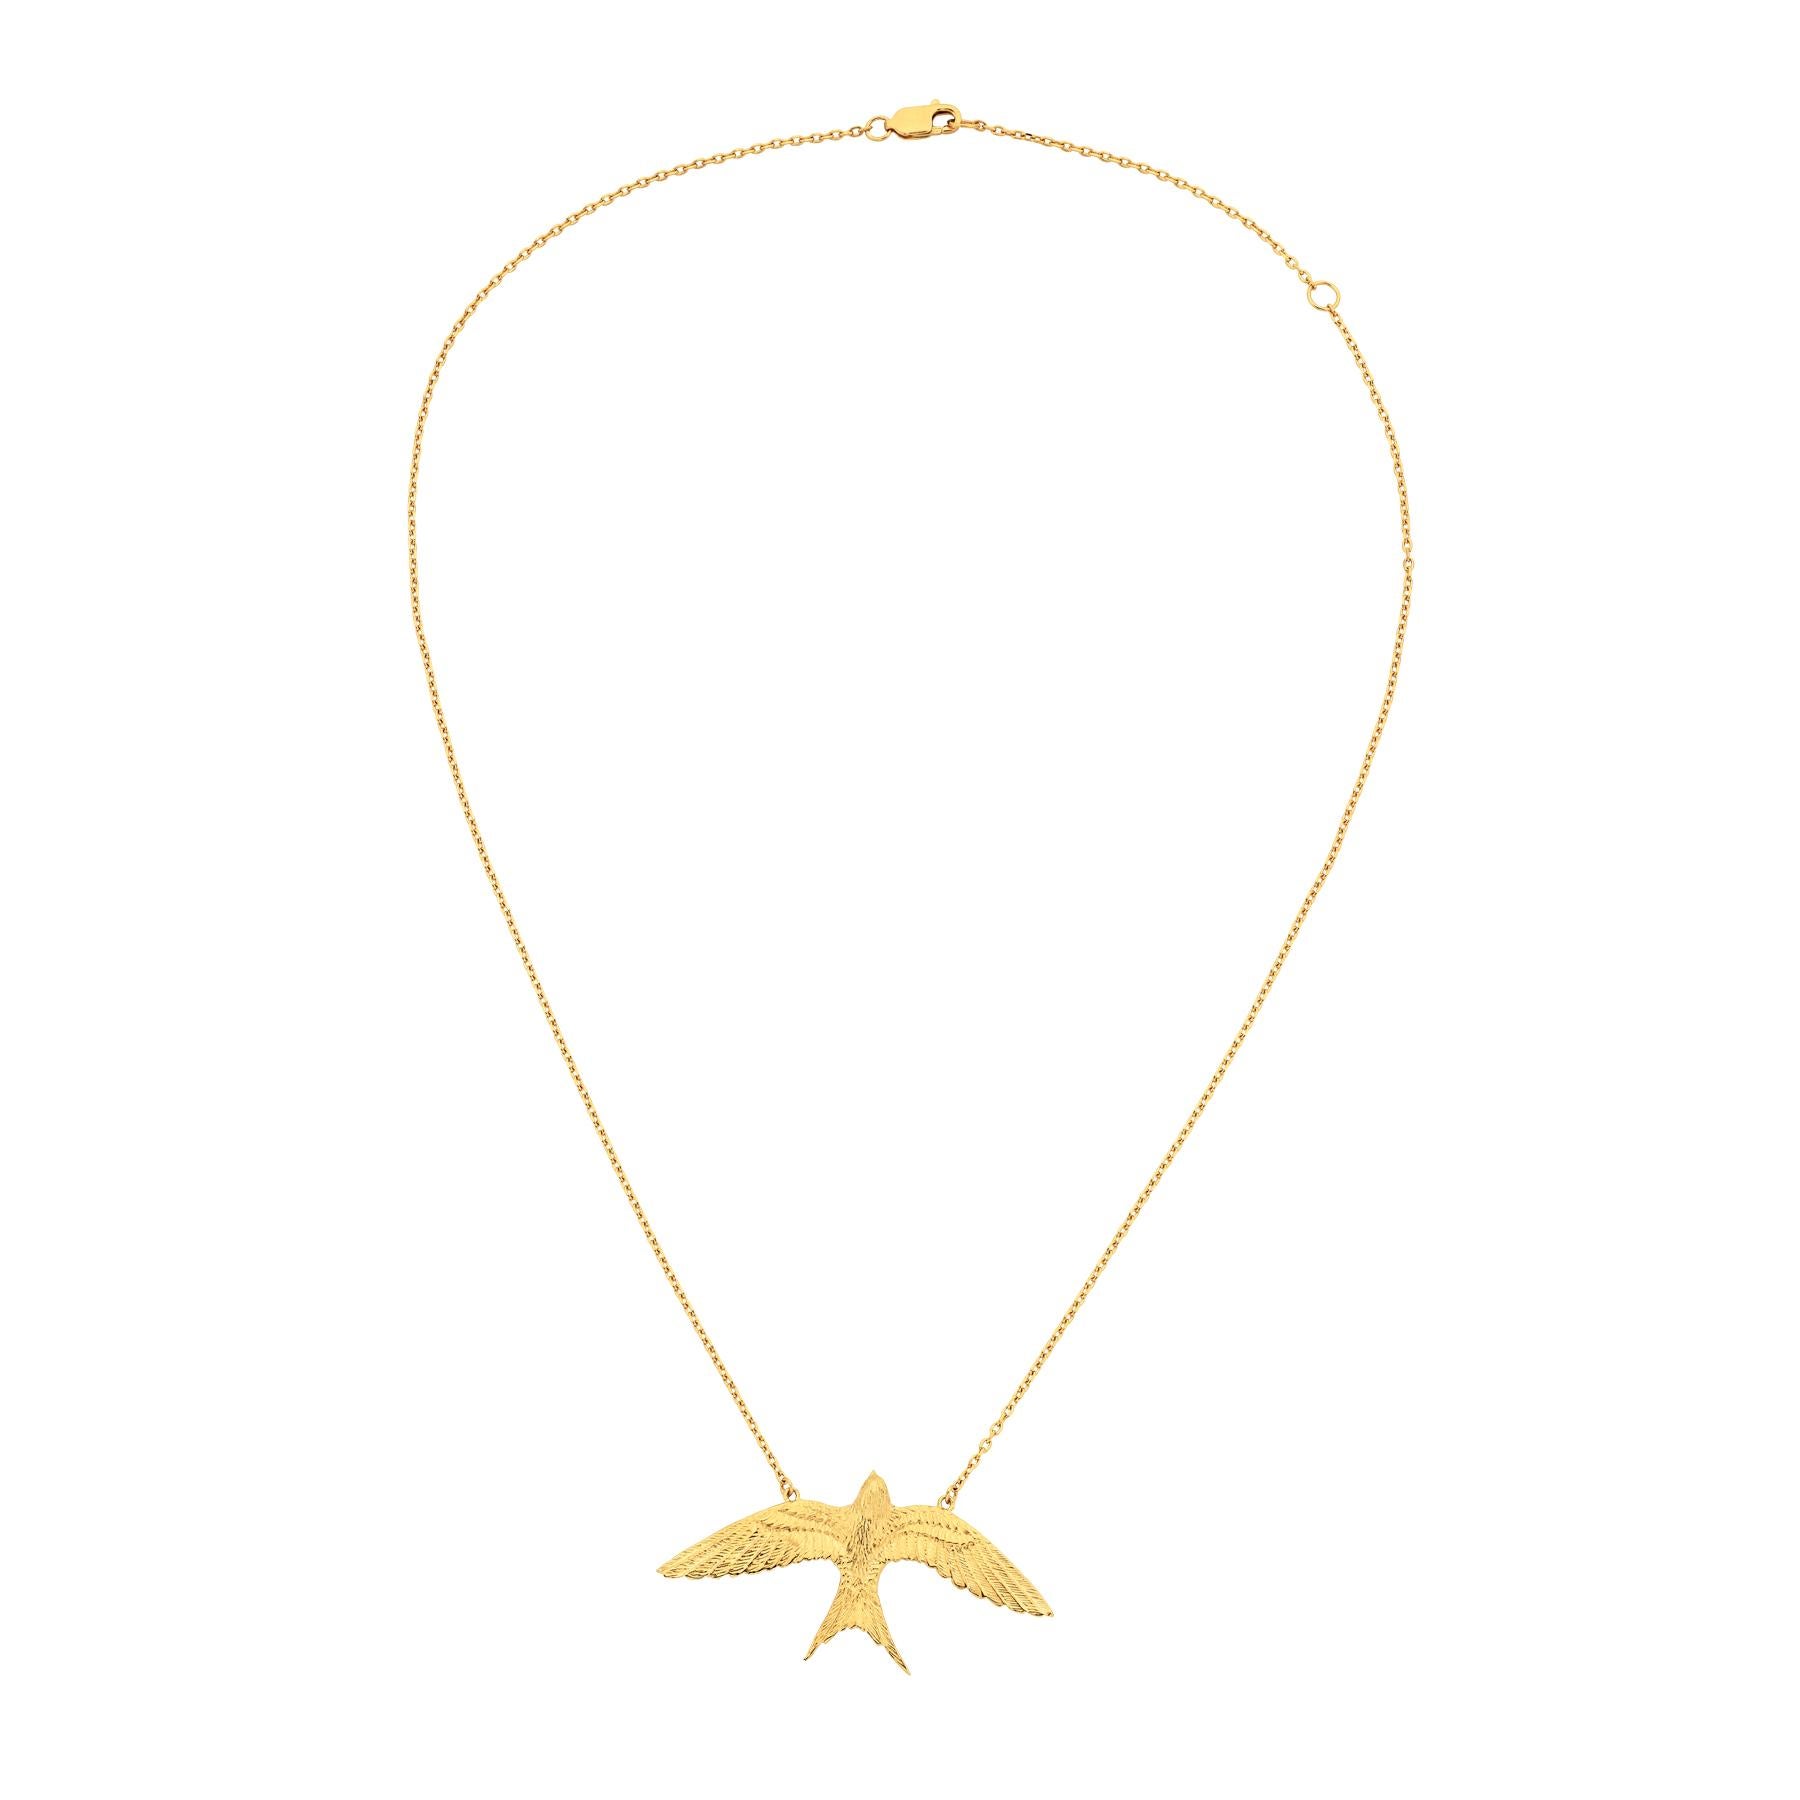 The swallow birds, once paired, remain together for life. They are a symbol of both freedom and loyalty. Even after distant travels, they reunite and stay close to one another. Our Lover necklace is lovingly hand carved from a wax model, which